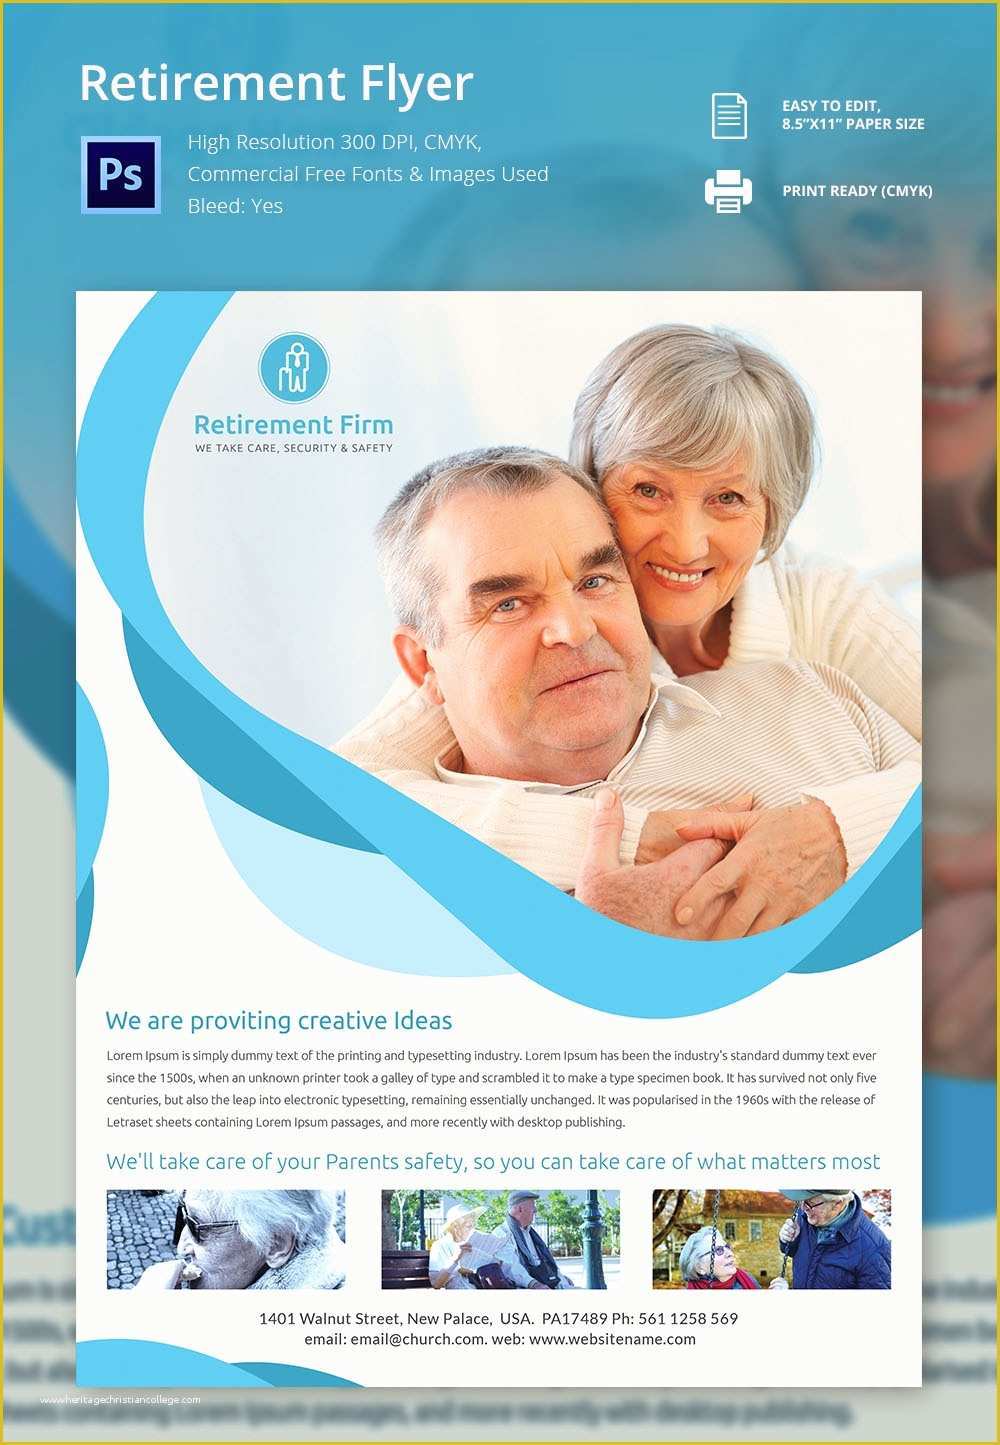 Free Templates for Flyers and Brochures Of 12 Retirement Flyers Free Psd Ai Vector Eps format